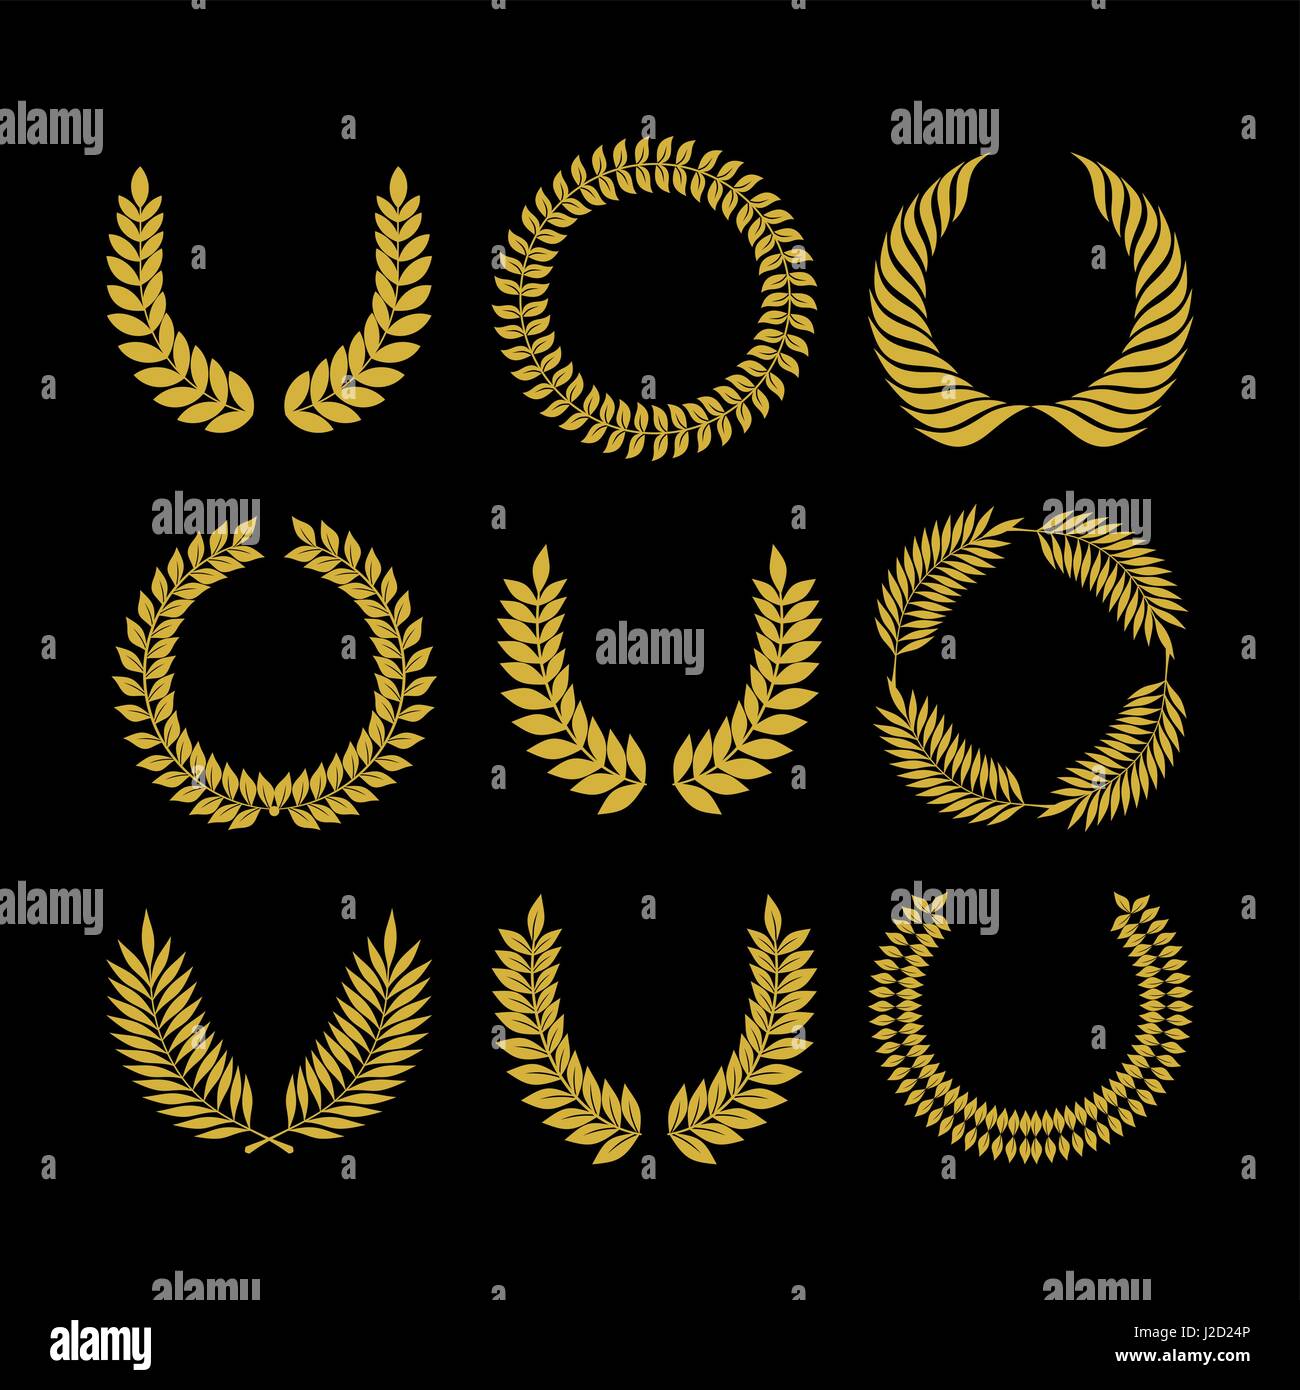 Big set of vector wreaths, collection of design elements for creating logos. Stock Vector